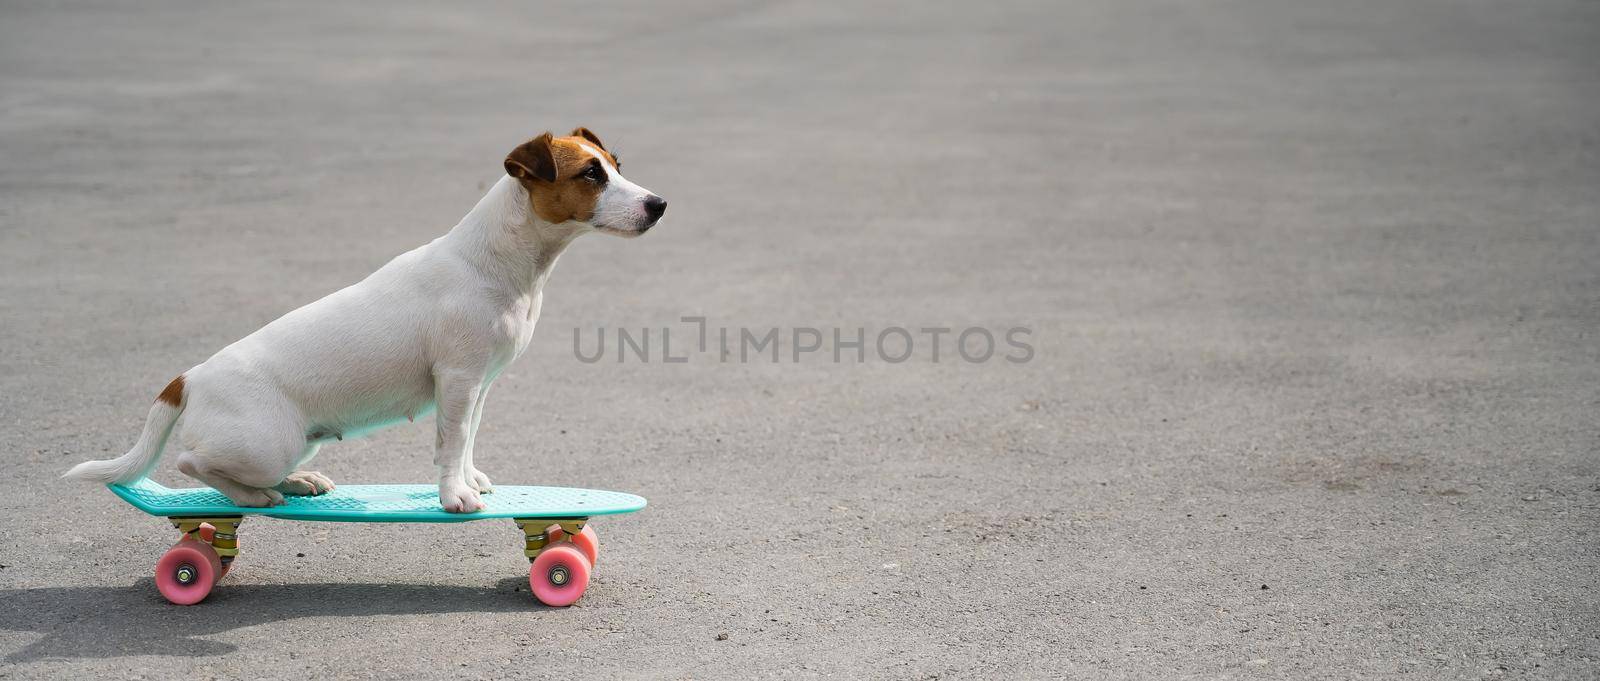 Jack russell terrier dog rides a penny board outdoors by mrwed54